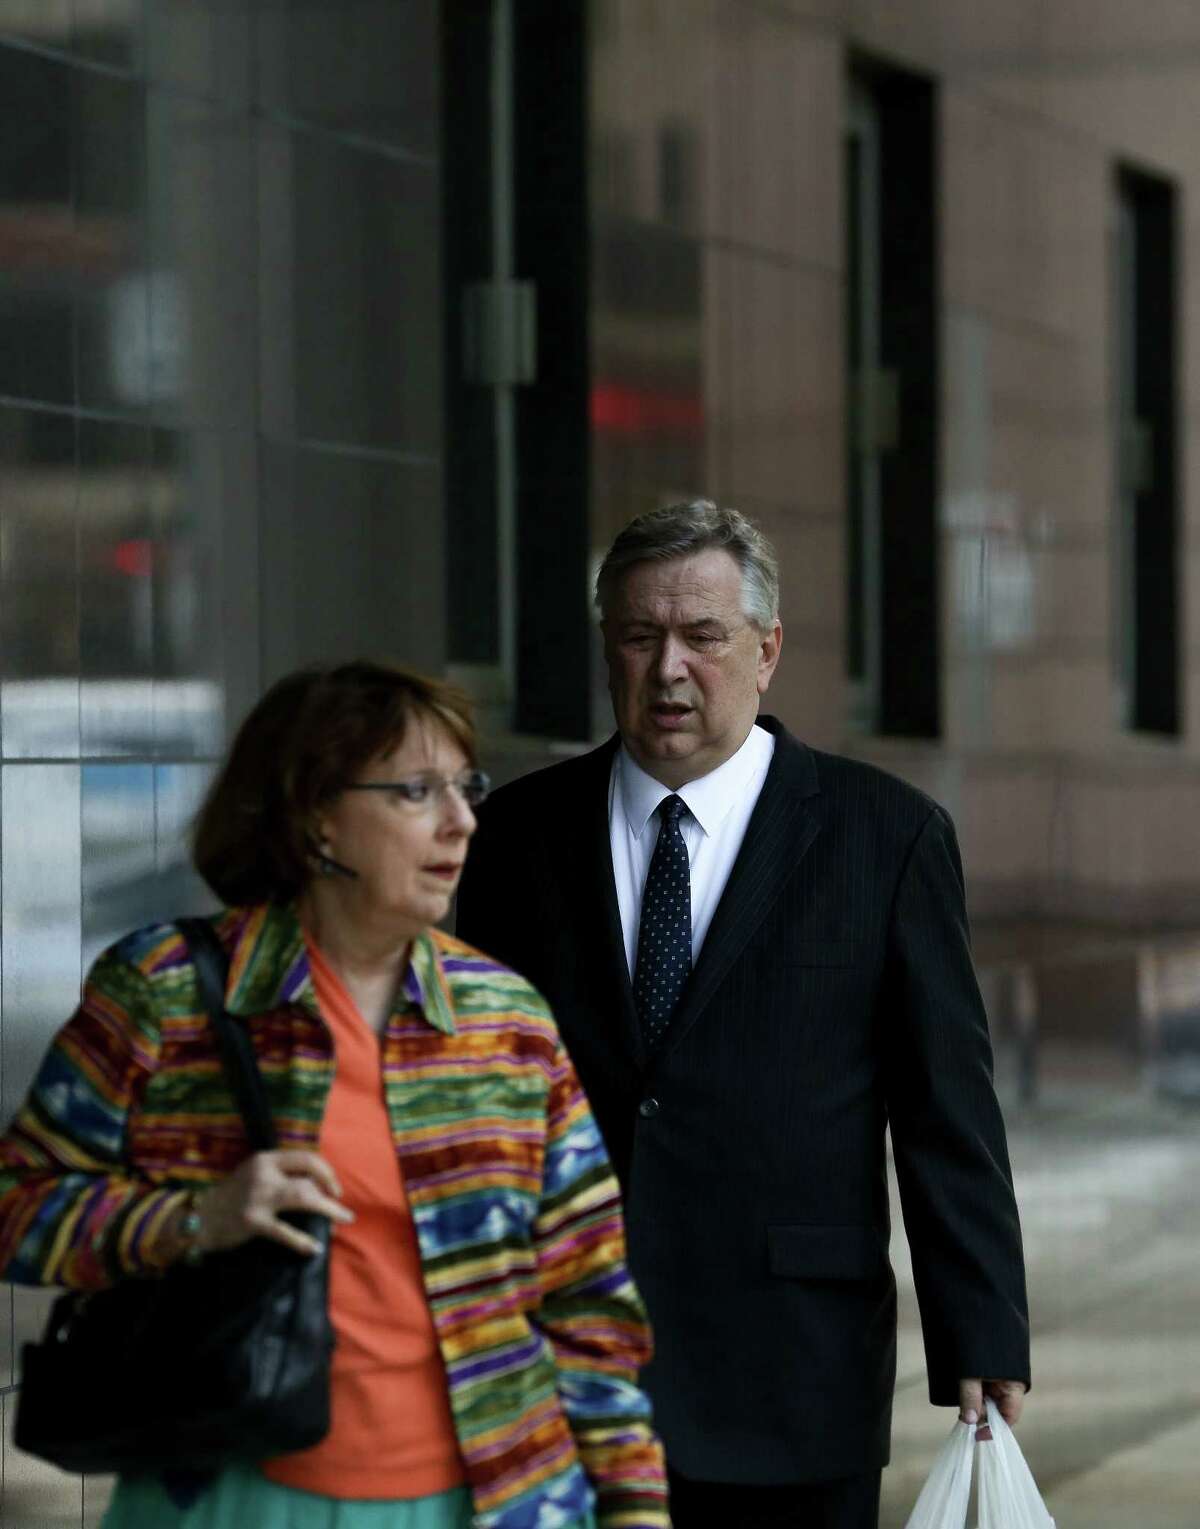 Former Congressman Steve Stockman Convicted On Federal Corruption Charges 0268